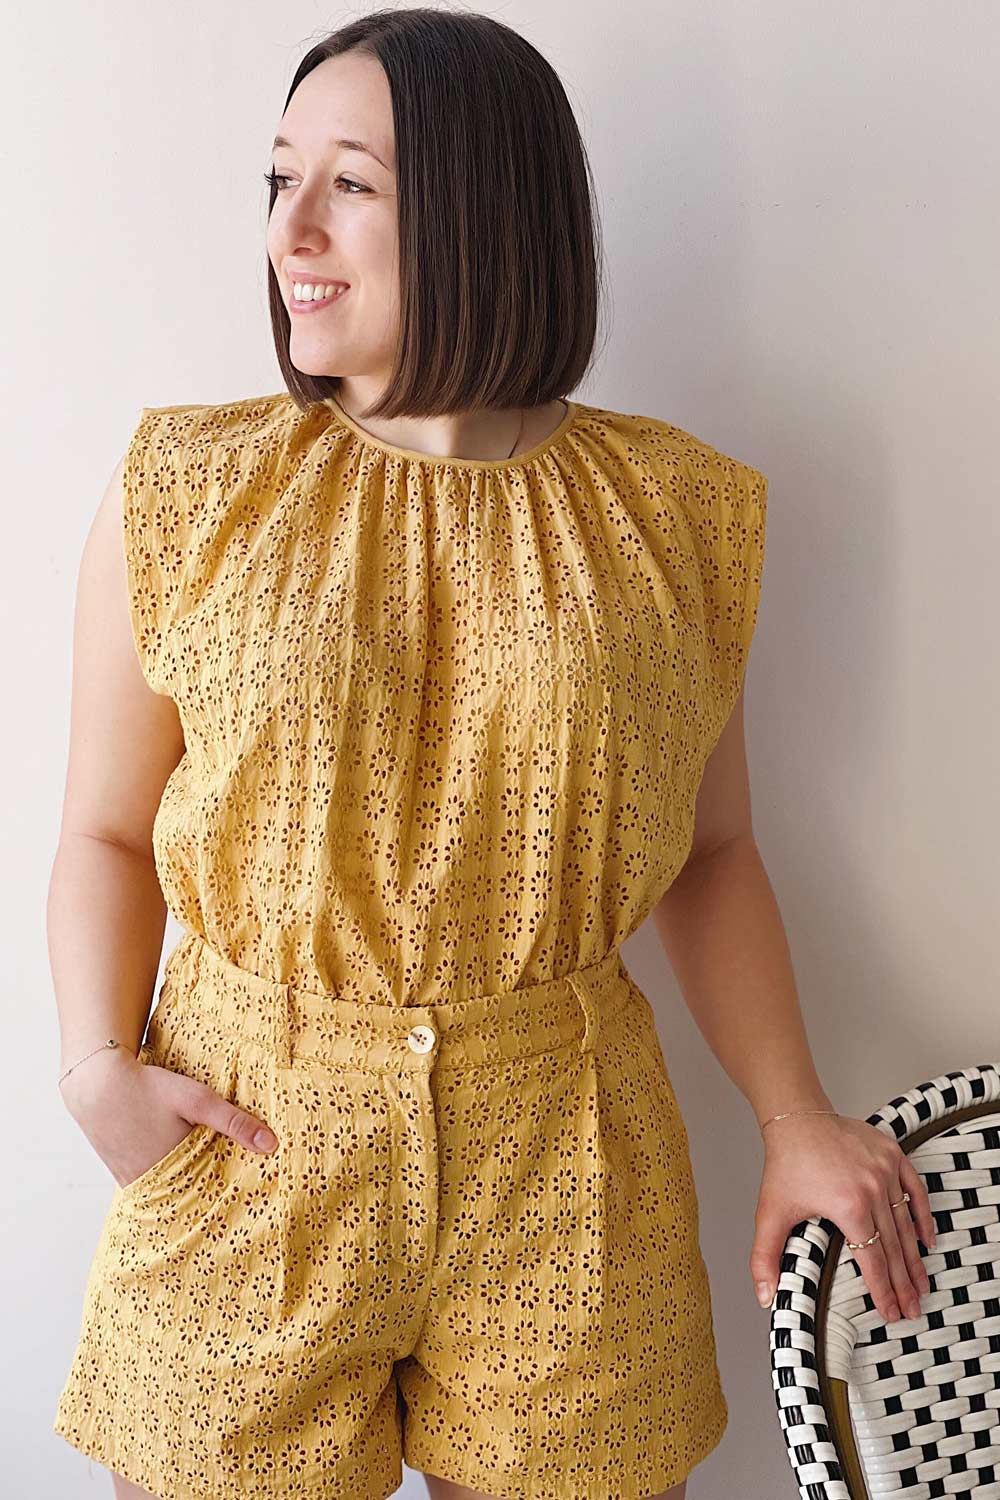 Risborough Yellow | Boxy Top w/ Openwork Embroidery - Boutique 1861 on model